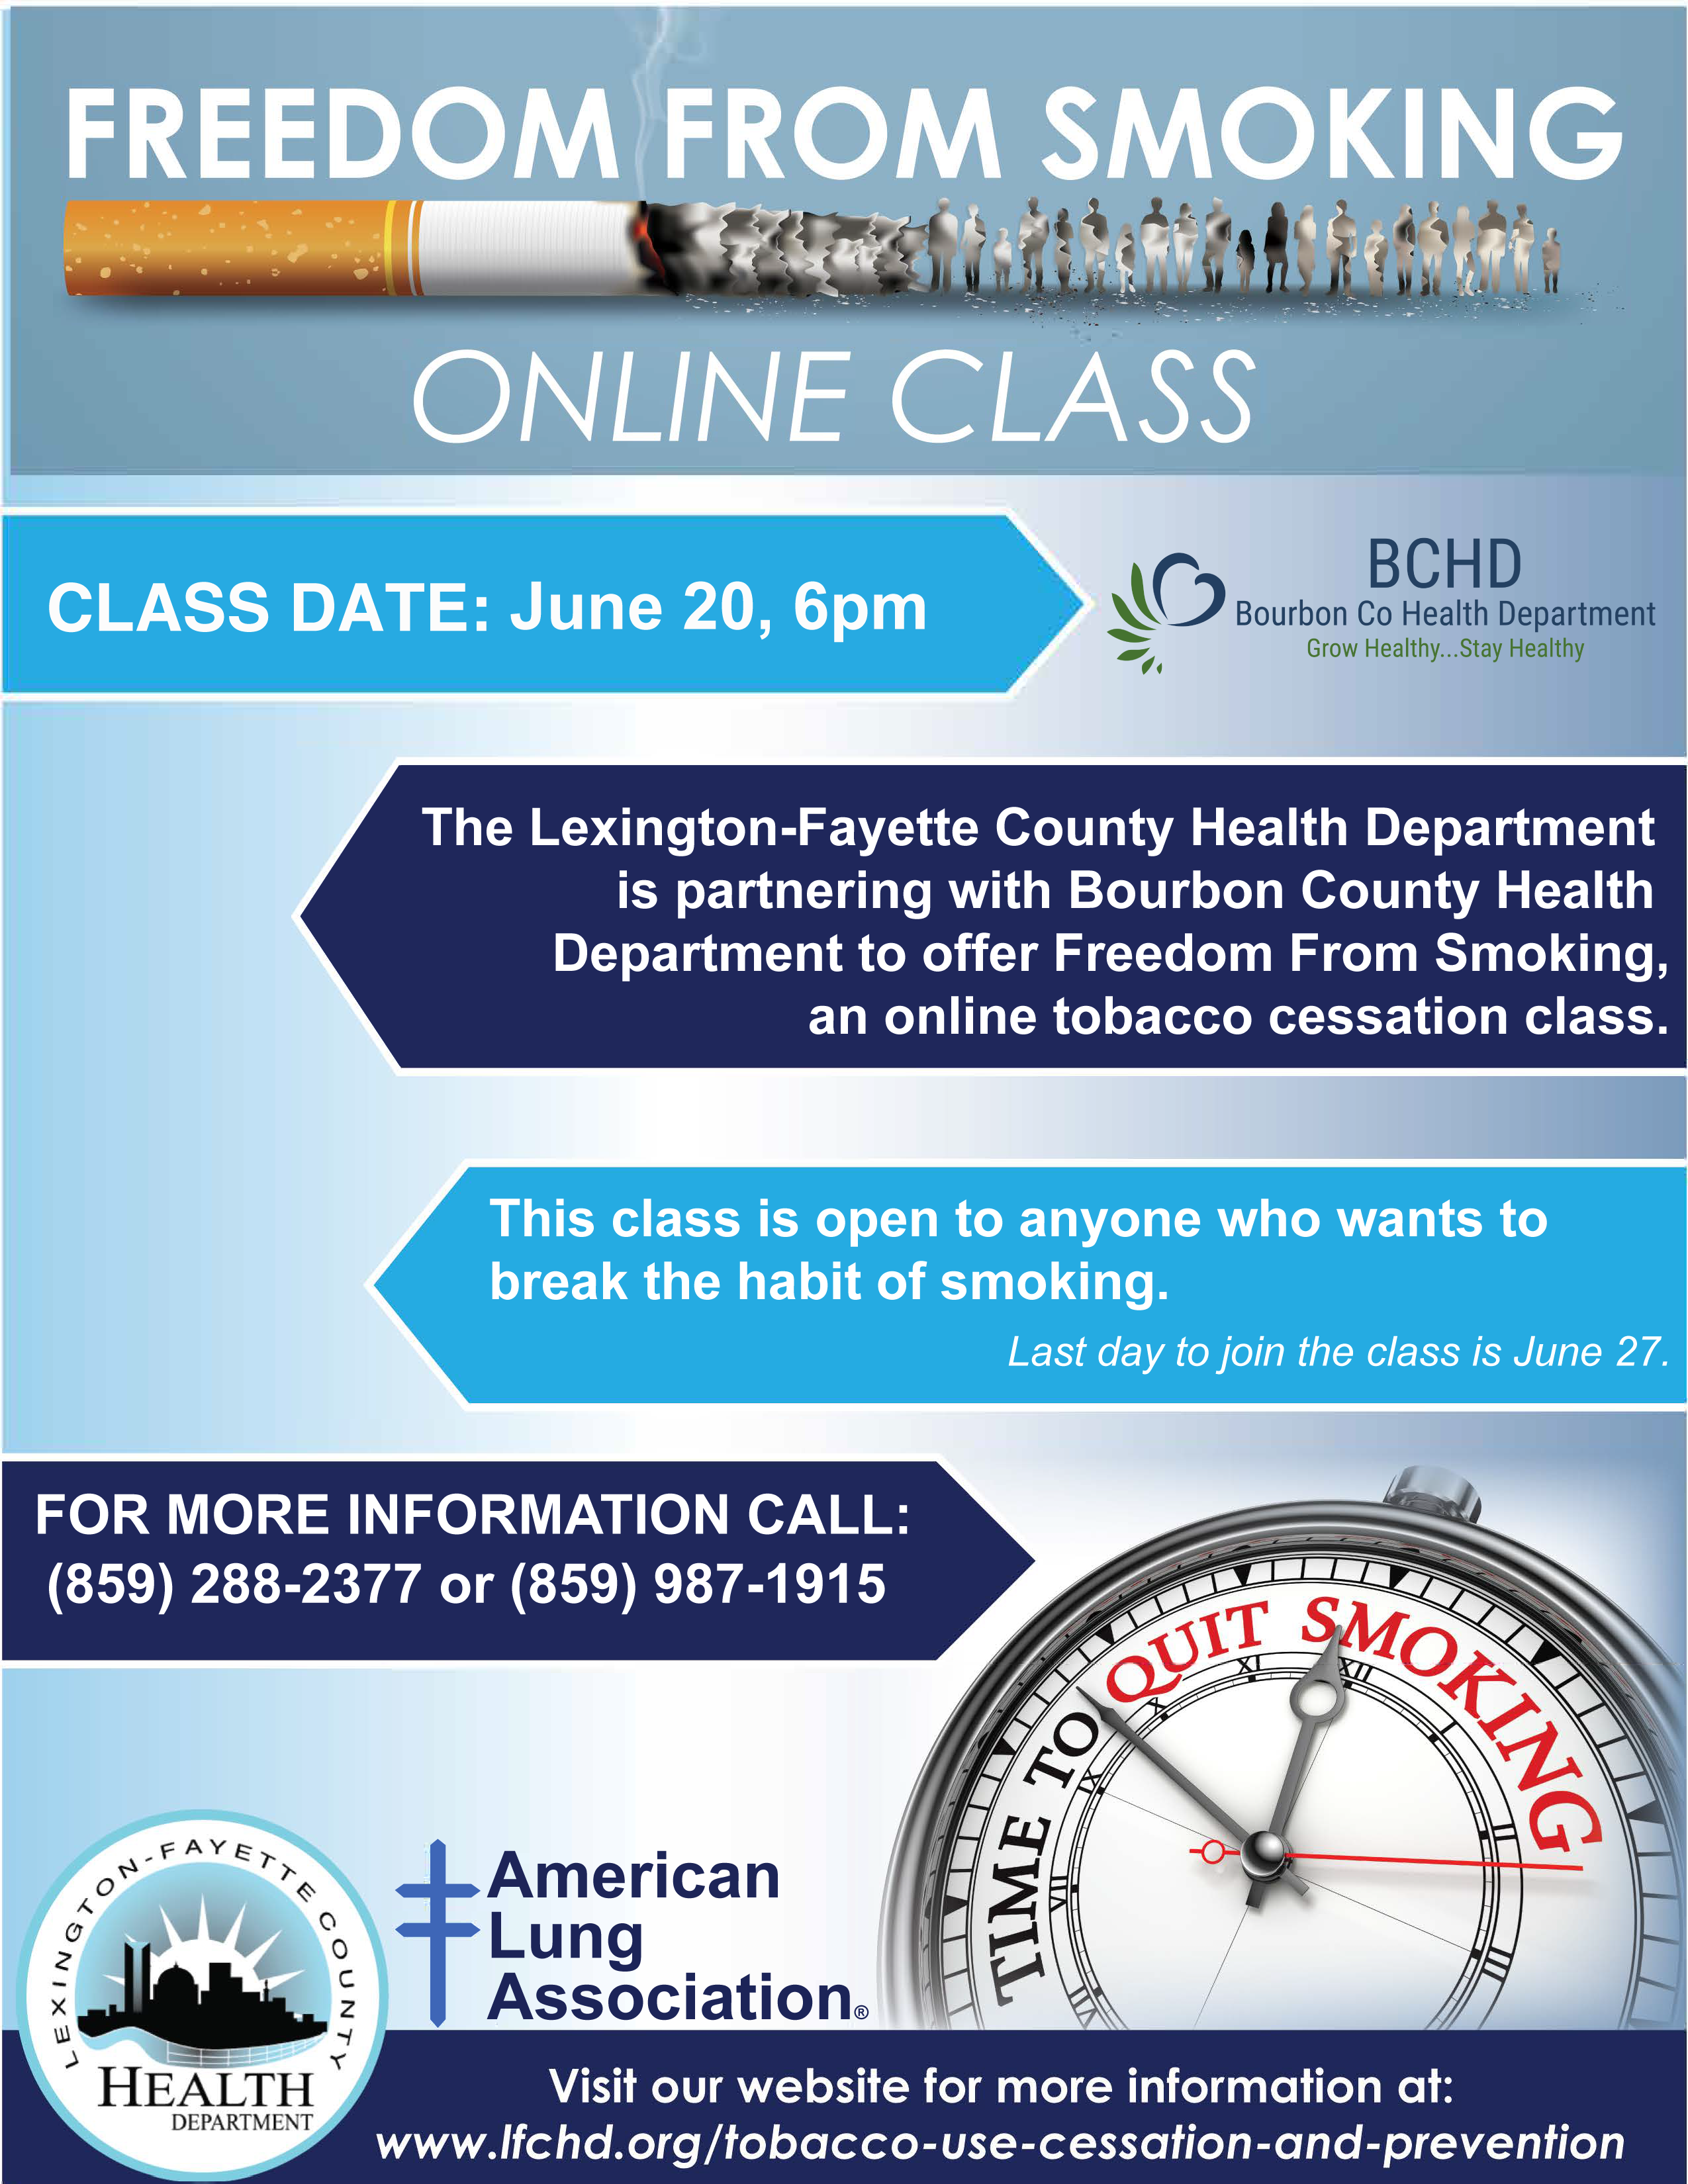 Freedom from Smoking class starts June 20